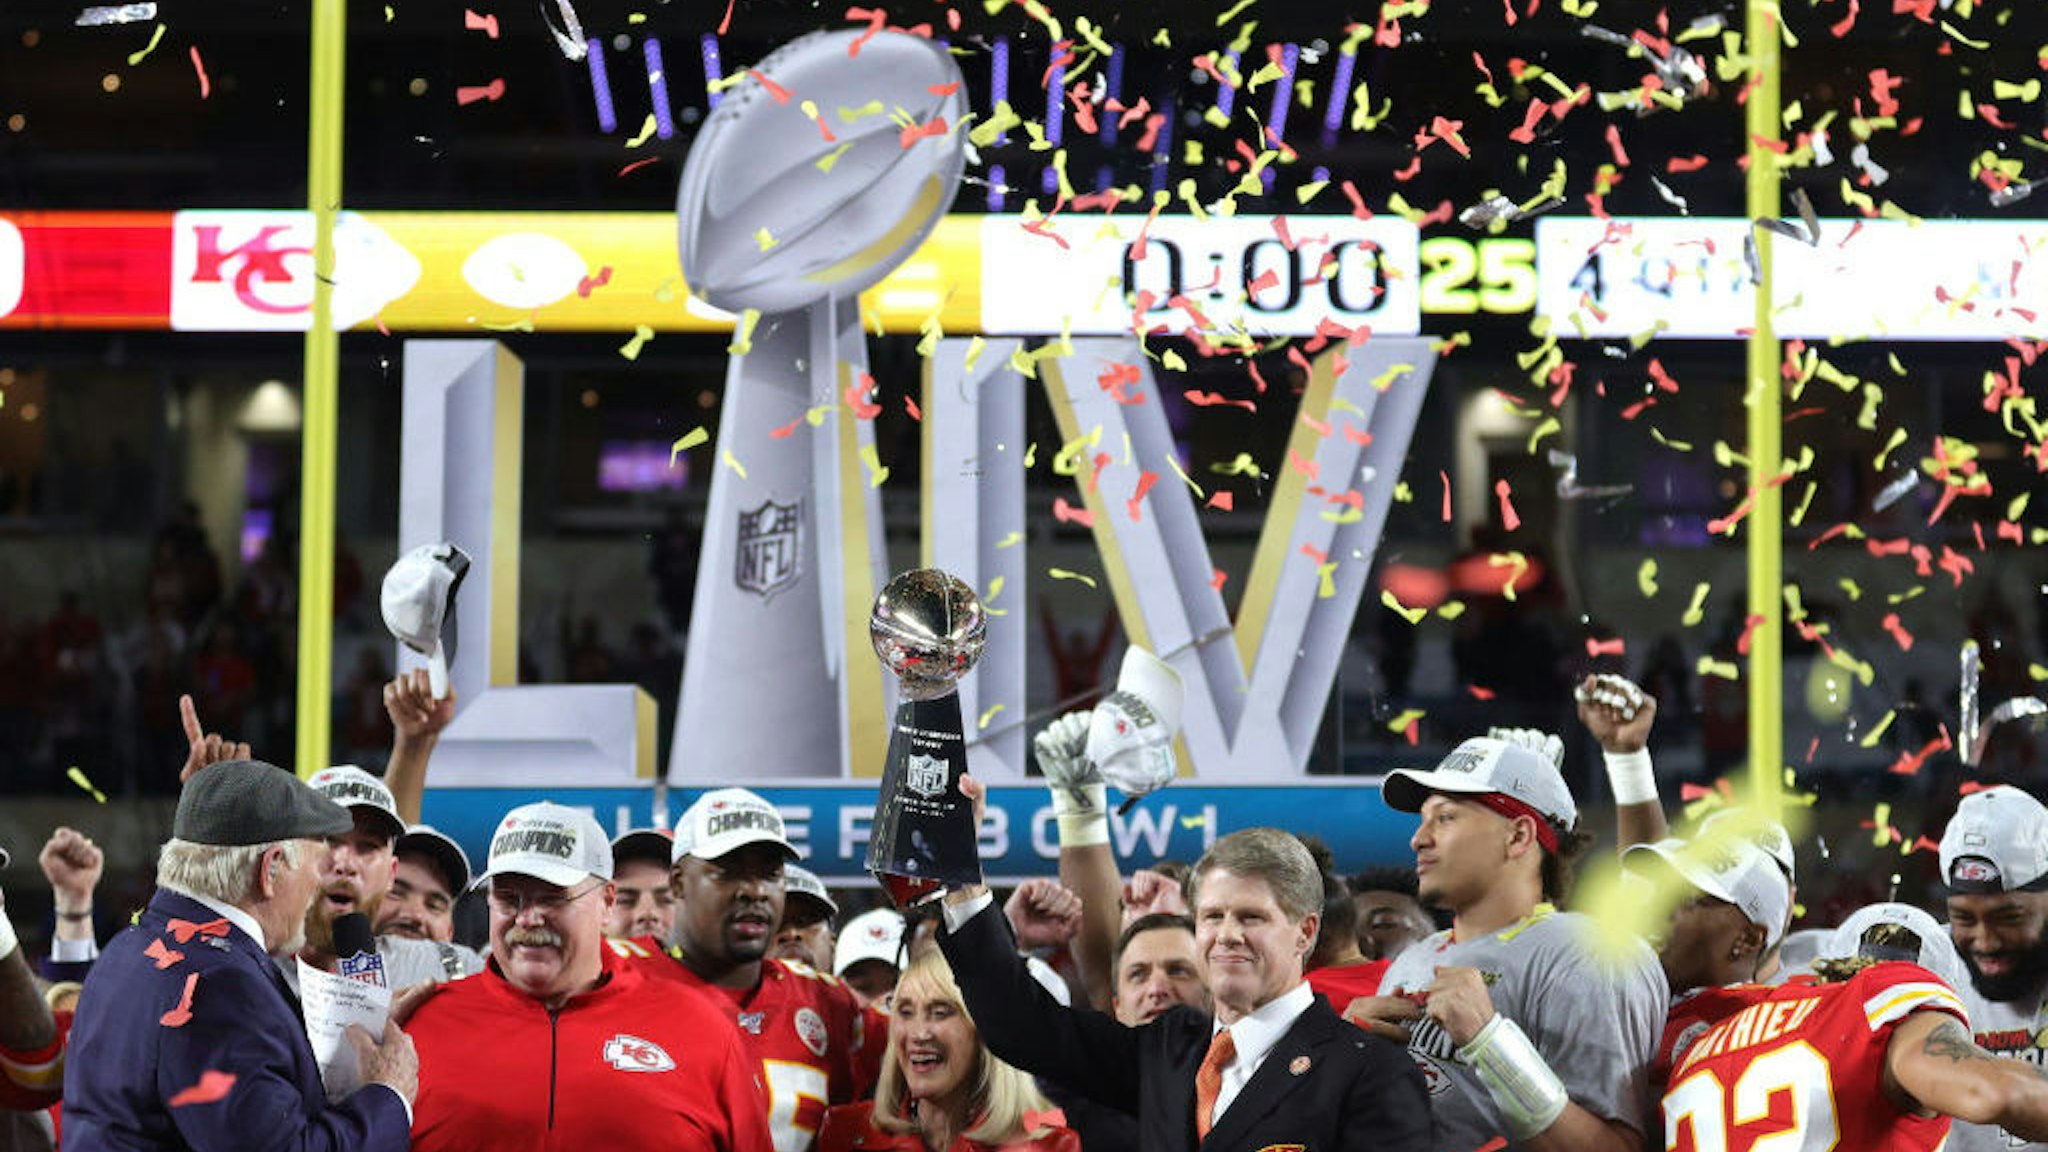 Members of the Kansas City Chiefs celebrate after defeating the San Francisco 49ers 31-20 in Super Bowl LIV at Hard Rock Stadium on February 02, 2020 in Miami, Florida. (Photo by Jamie Squire/Getty Images)